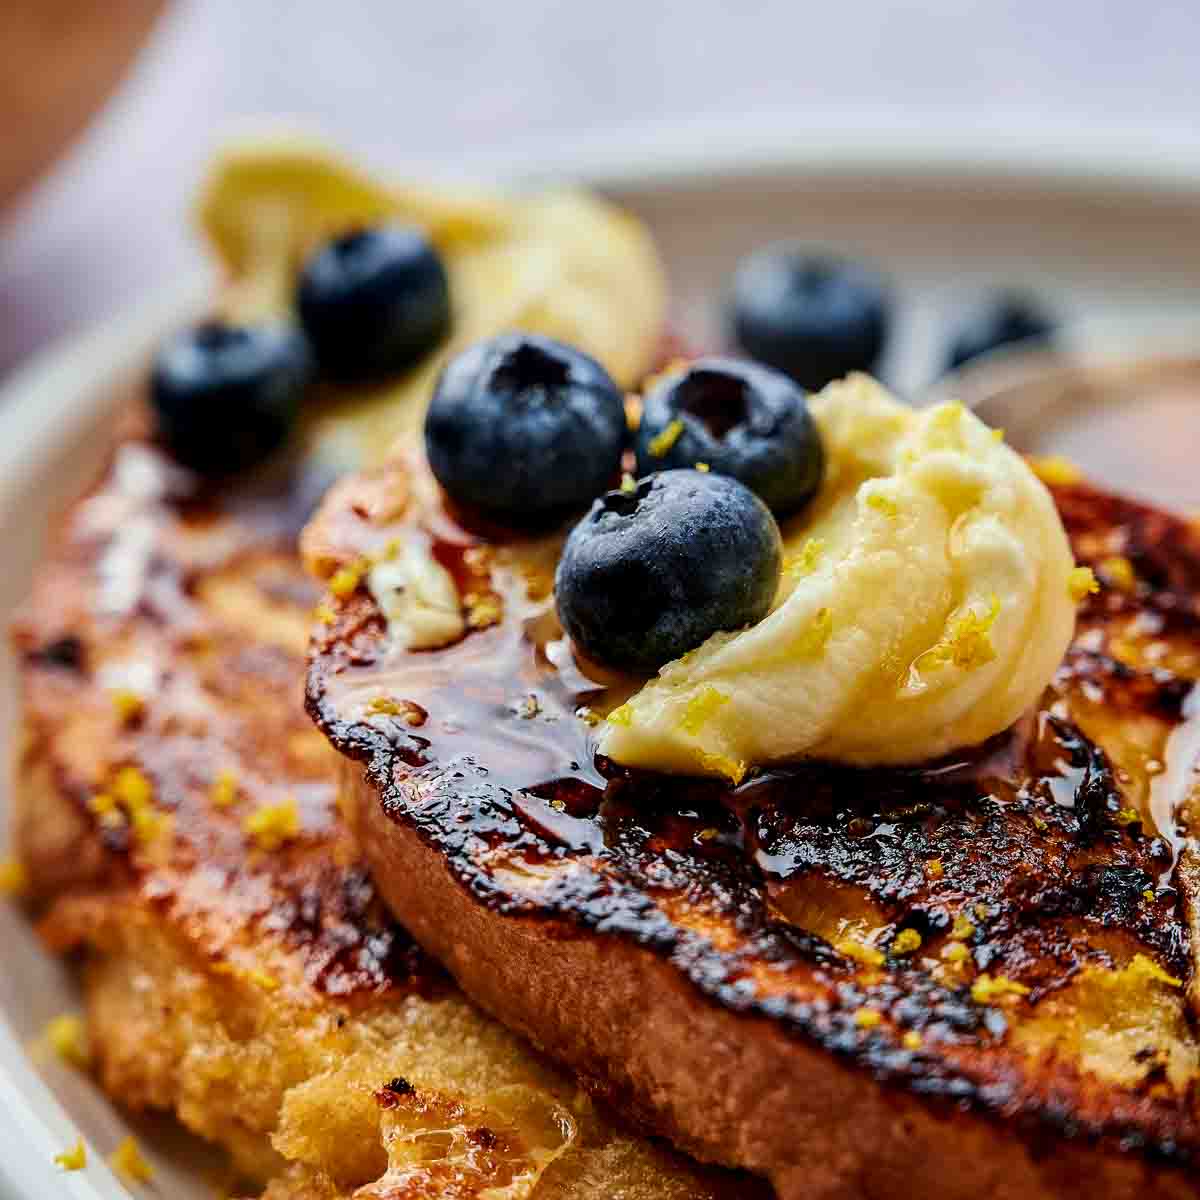 A few slices of mascarpone french toast with blueberries and lemon zest.